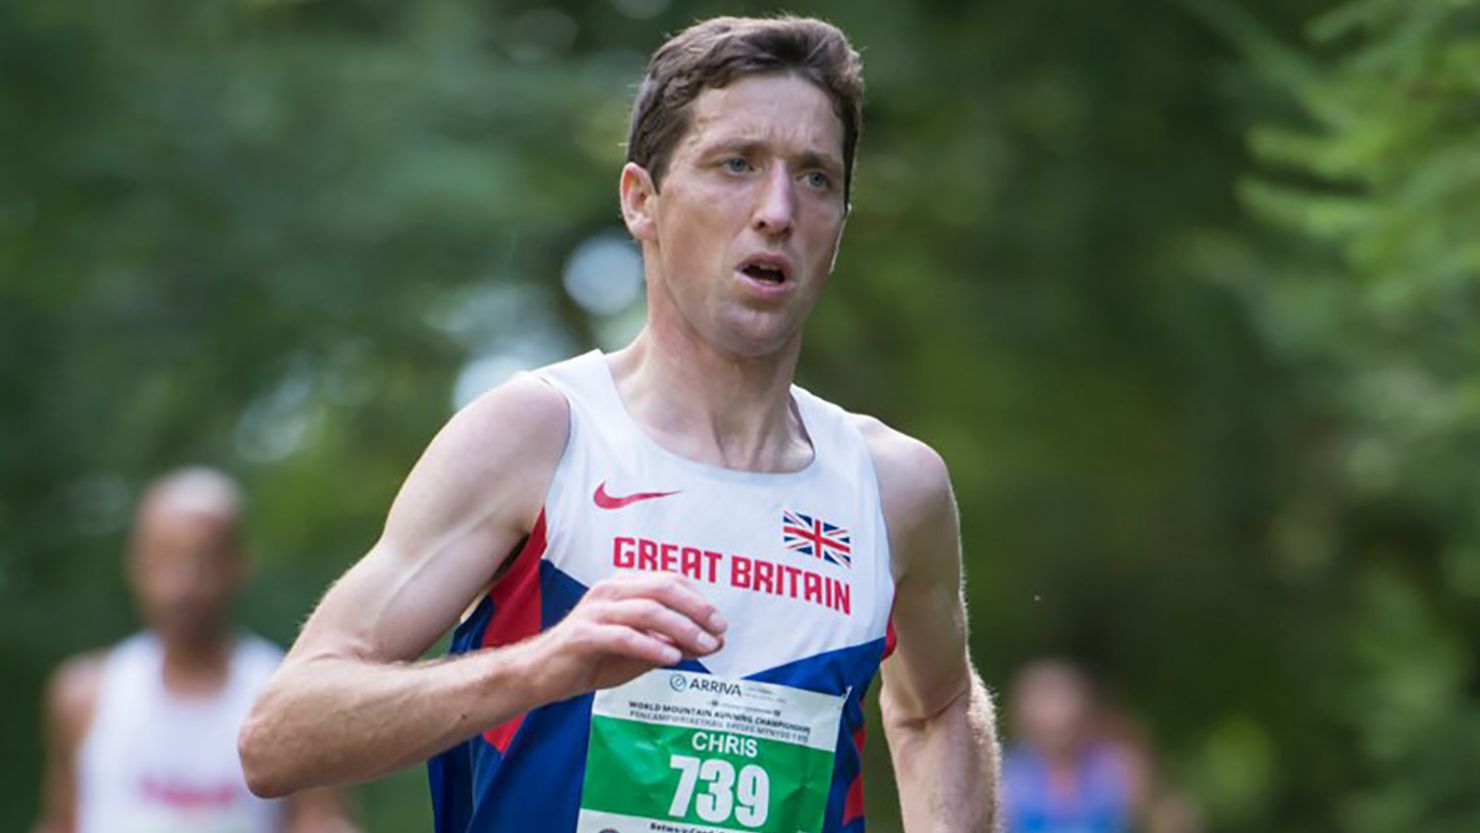 Chris Smith, the Great Britain and Northern Ireland mountain runner, has died at 43.